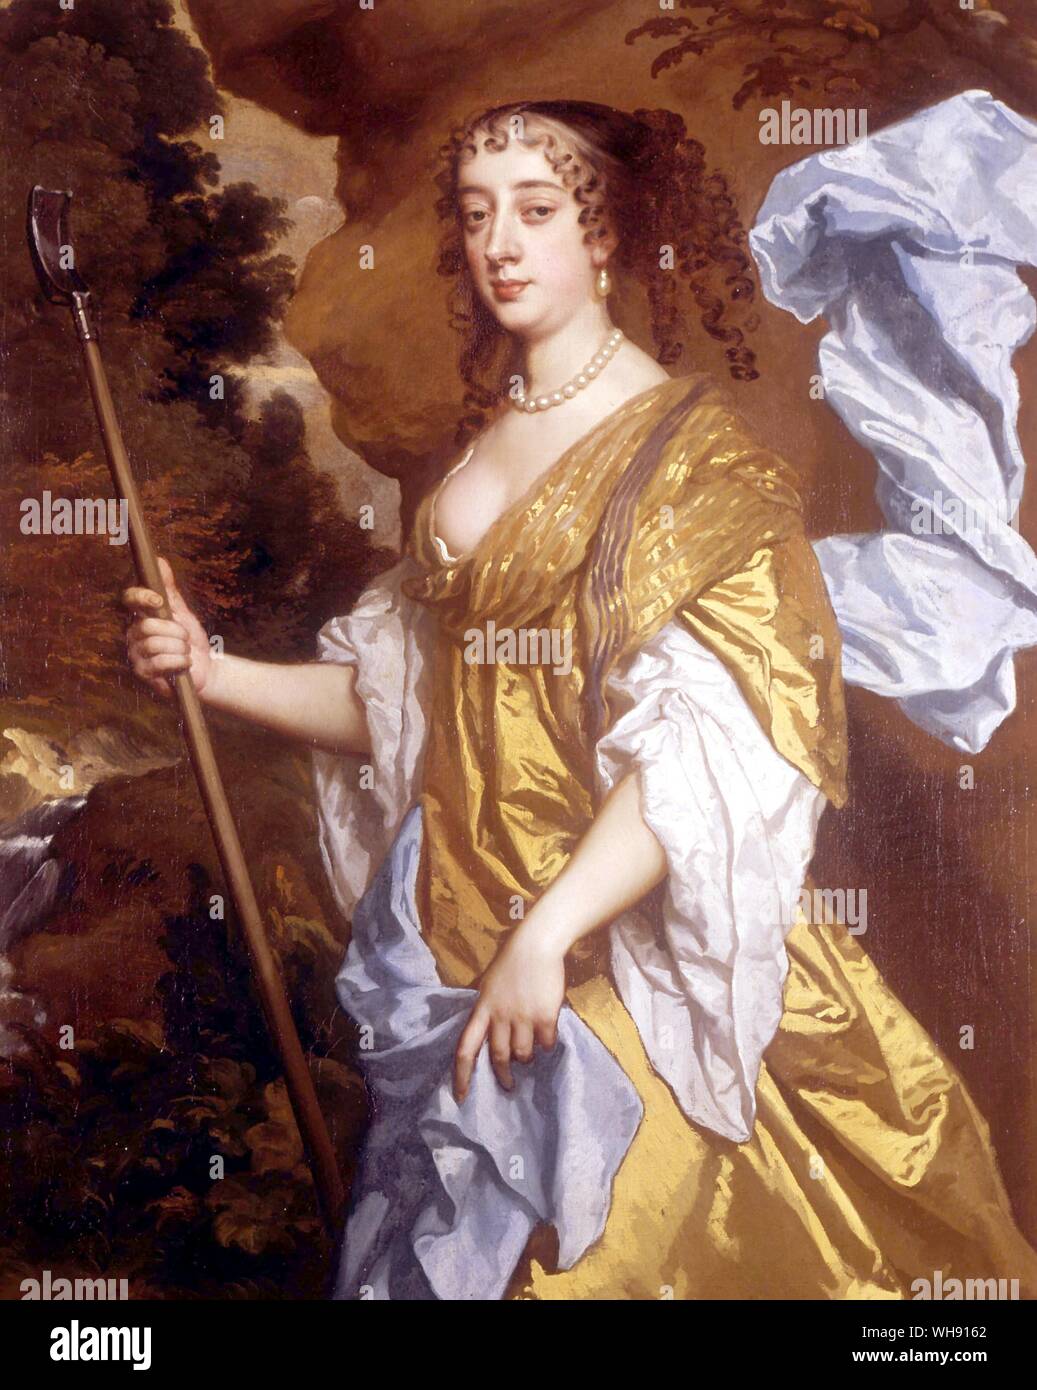 ... luscious and animated...' Barbara Villiers, Lady Castlemaine and later Duchess of Cleveland (1641-1709). She was simultaneously the mistress of both Charles II and the young John Churchill. Painting by Sir Peter Lely (1618-1680). Stock Photo